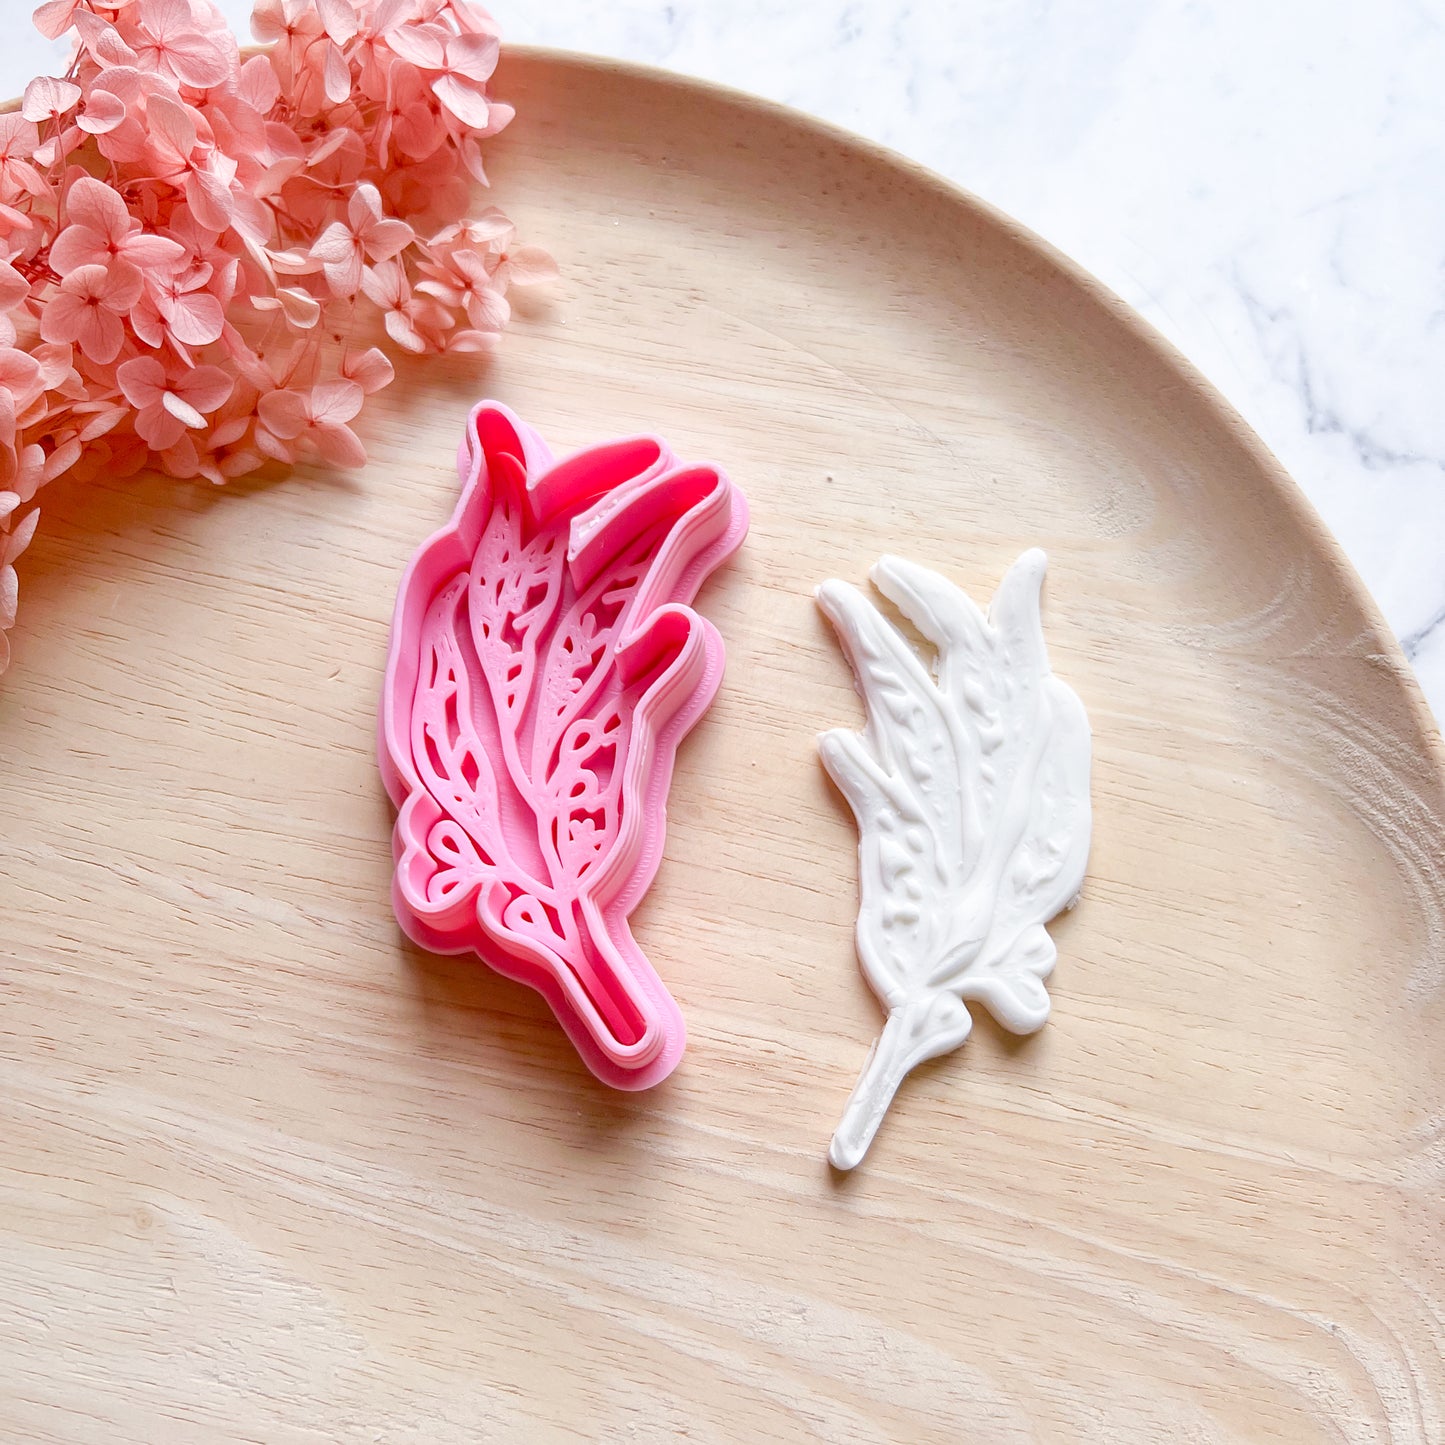 Eucalyptus Branch Cookie Cutter & Stamp